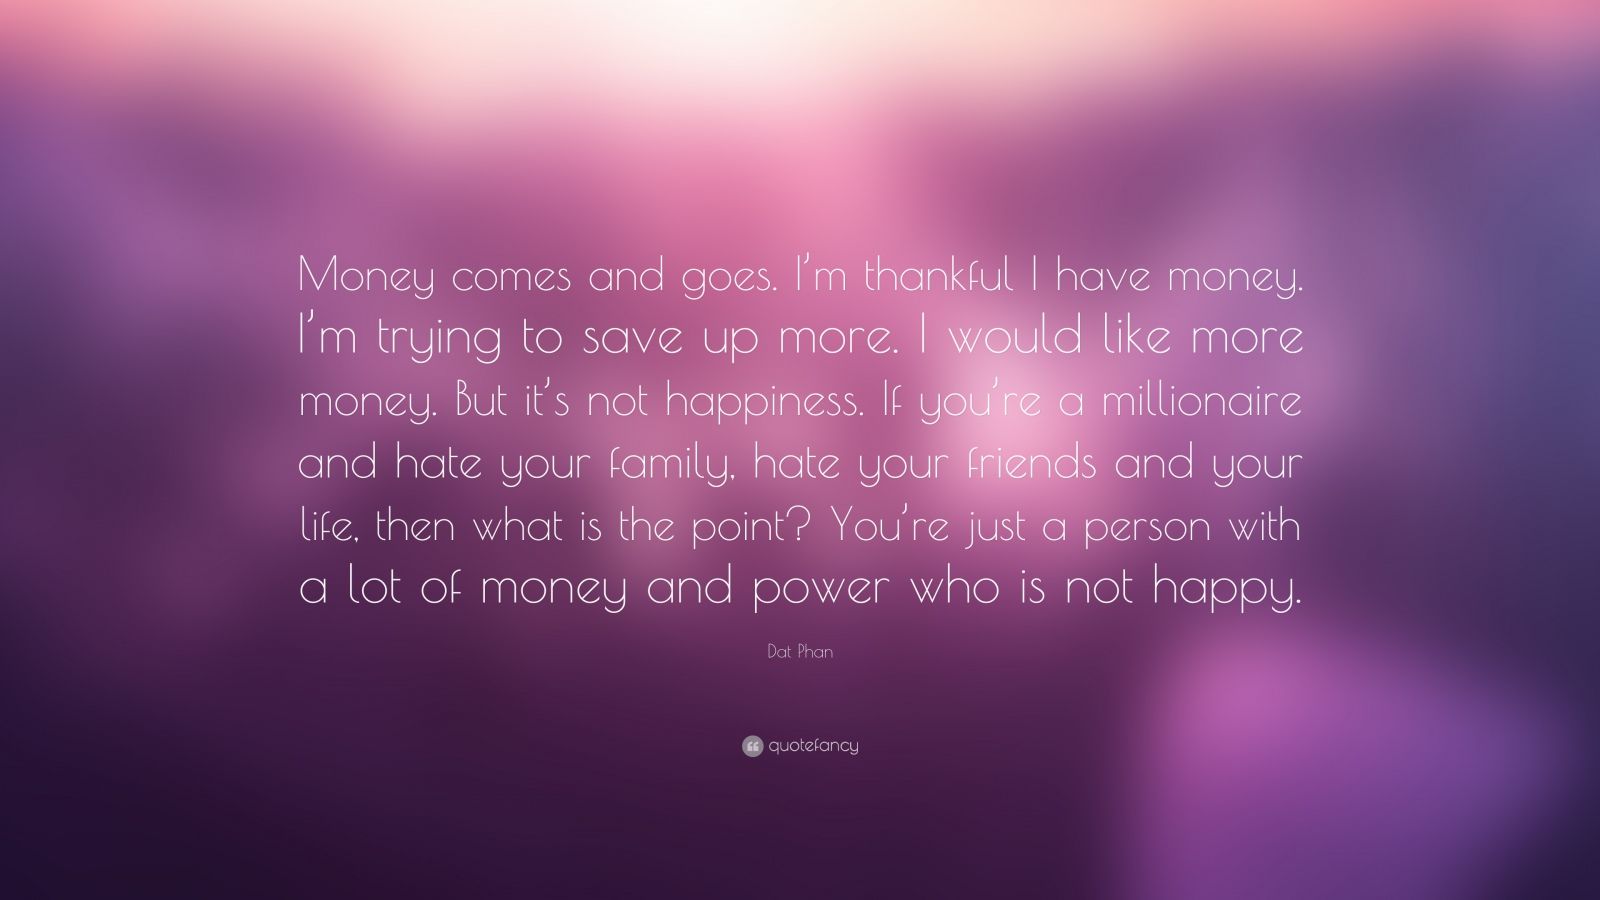 Dat Phan Quote: “Money comes and goes. I’m thankful I have money. I’m ...